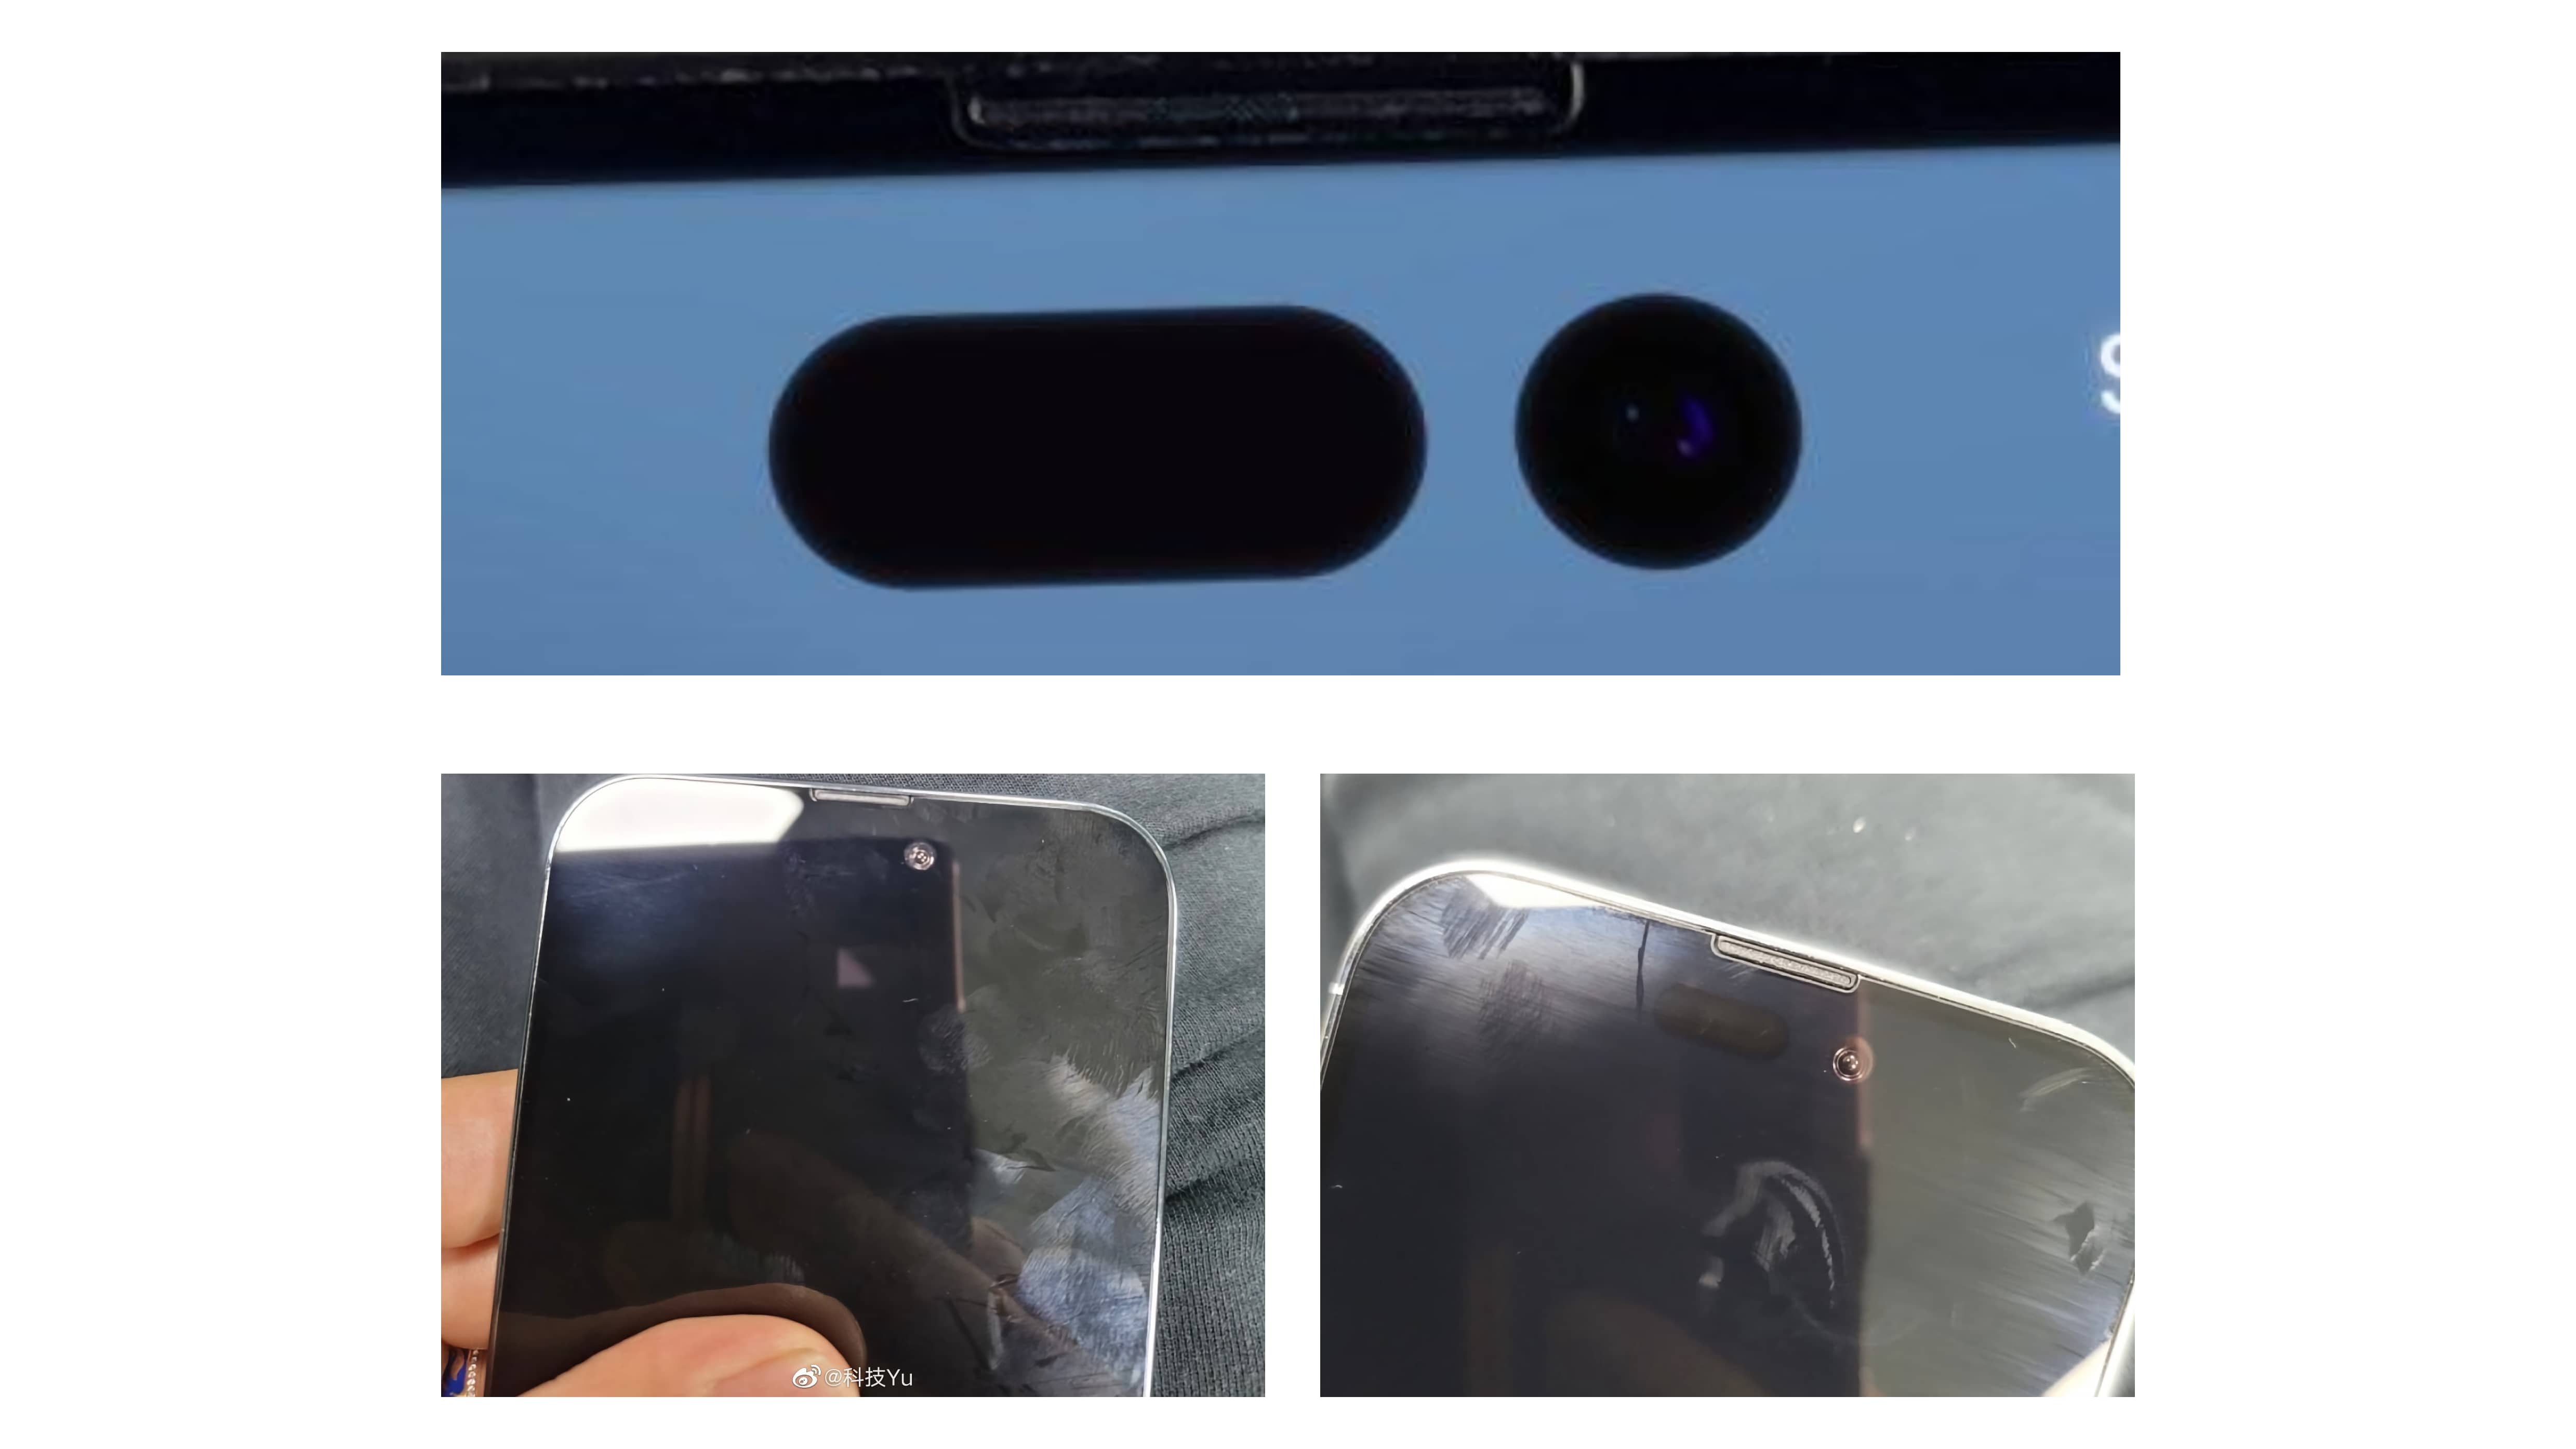 Leaked images showing a closeup of the ‌iPhone 14 Pro‌'s rumored pill and hole-punch design